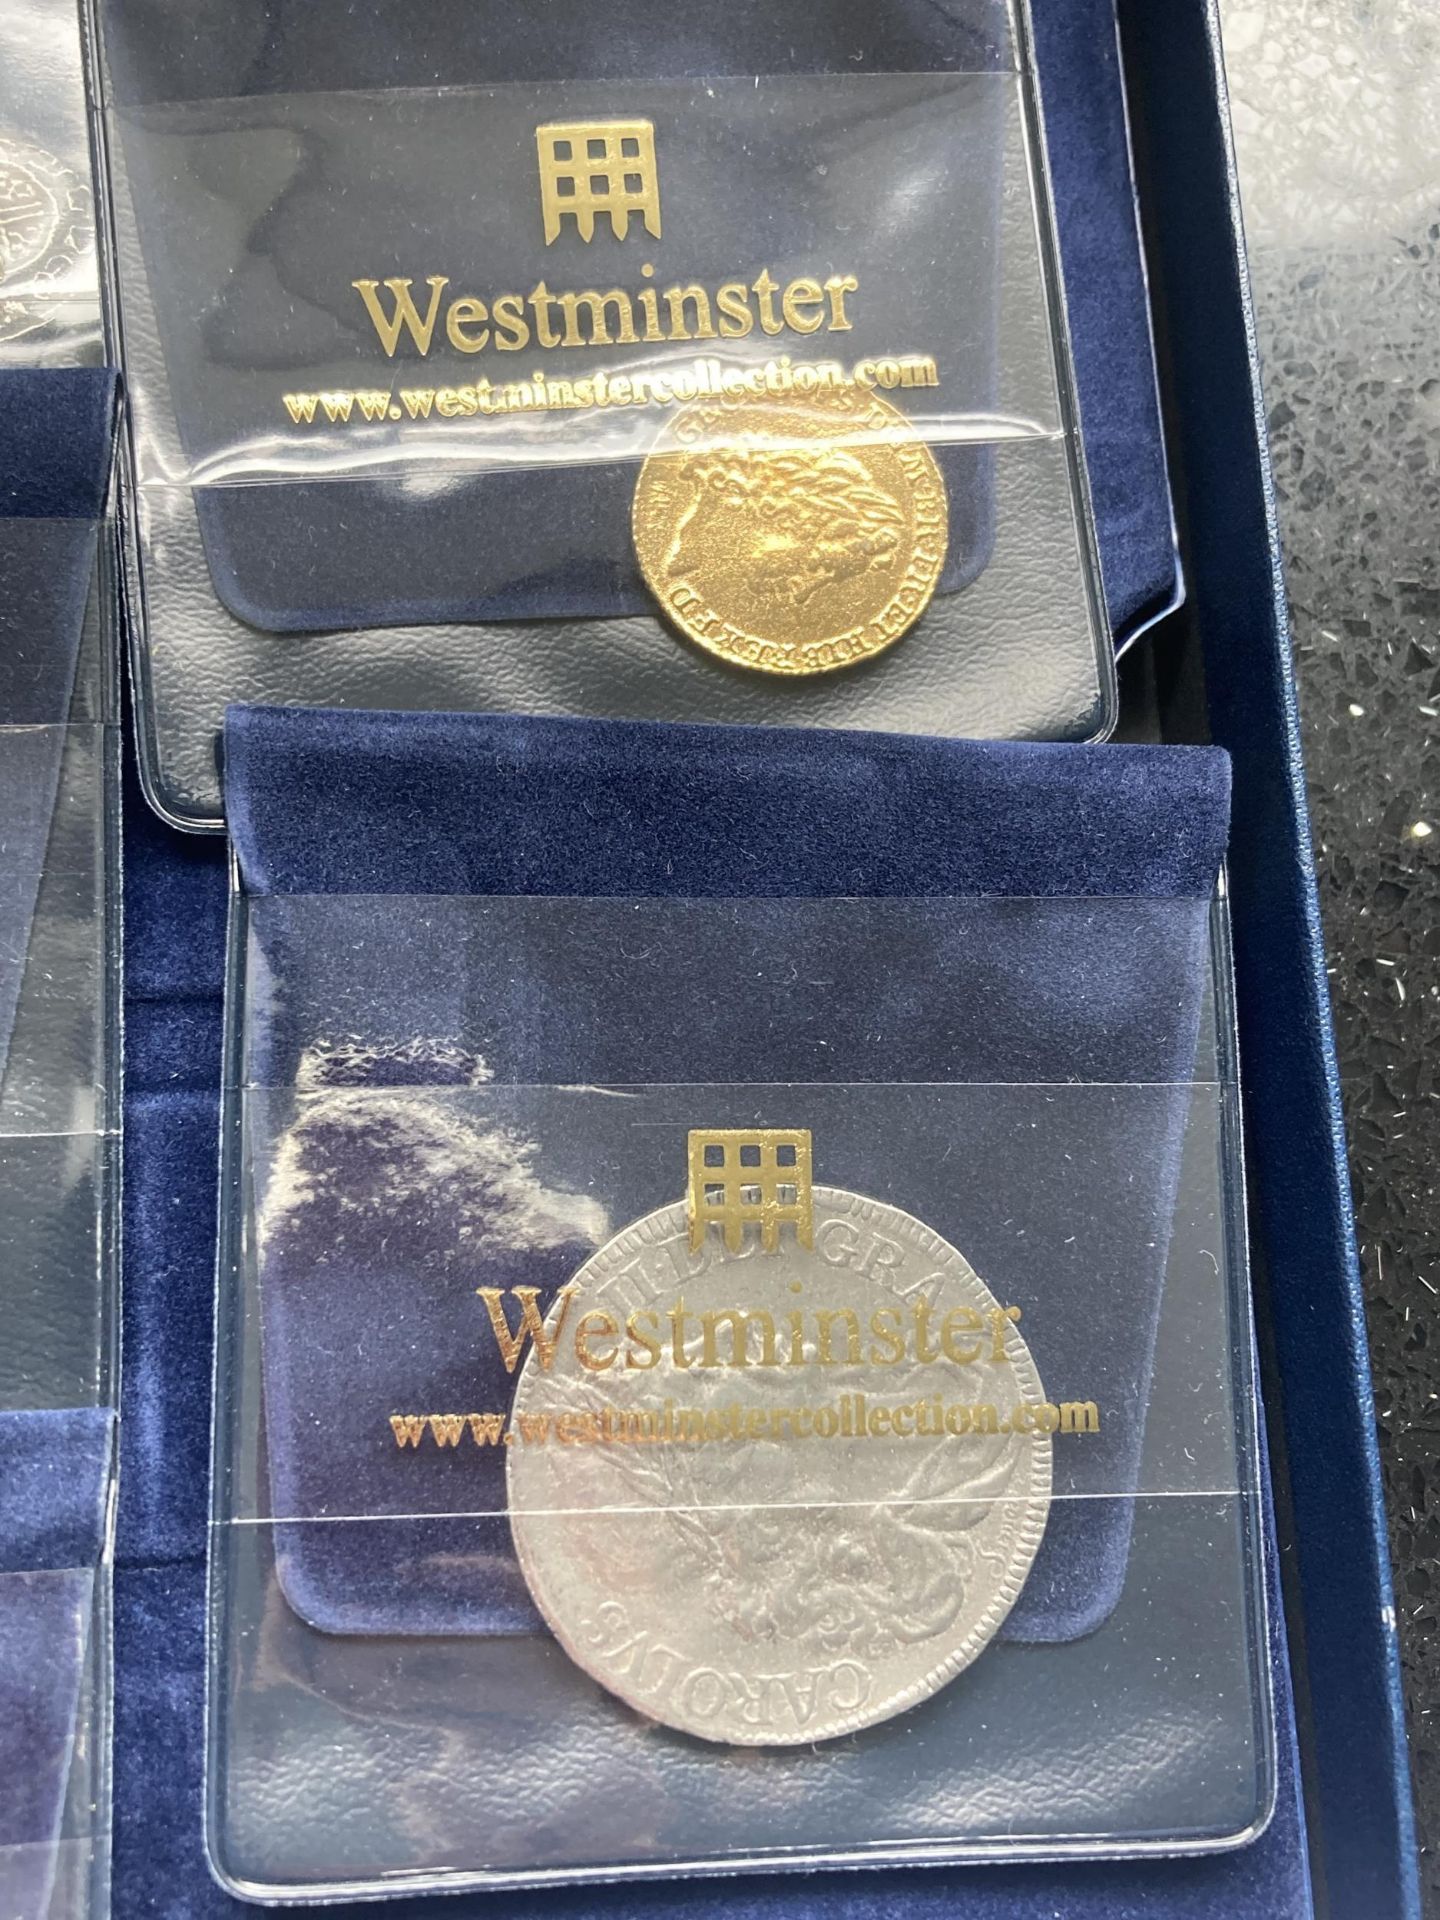 .THE WESTMINSTER COLLECTION OF REPLICA COINS IN A PRESENTATION CASE - Image 4 of 6